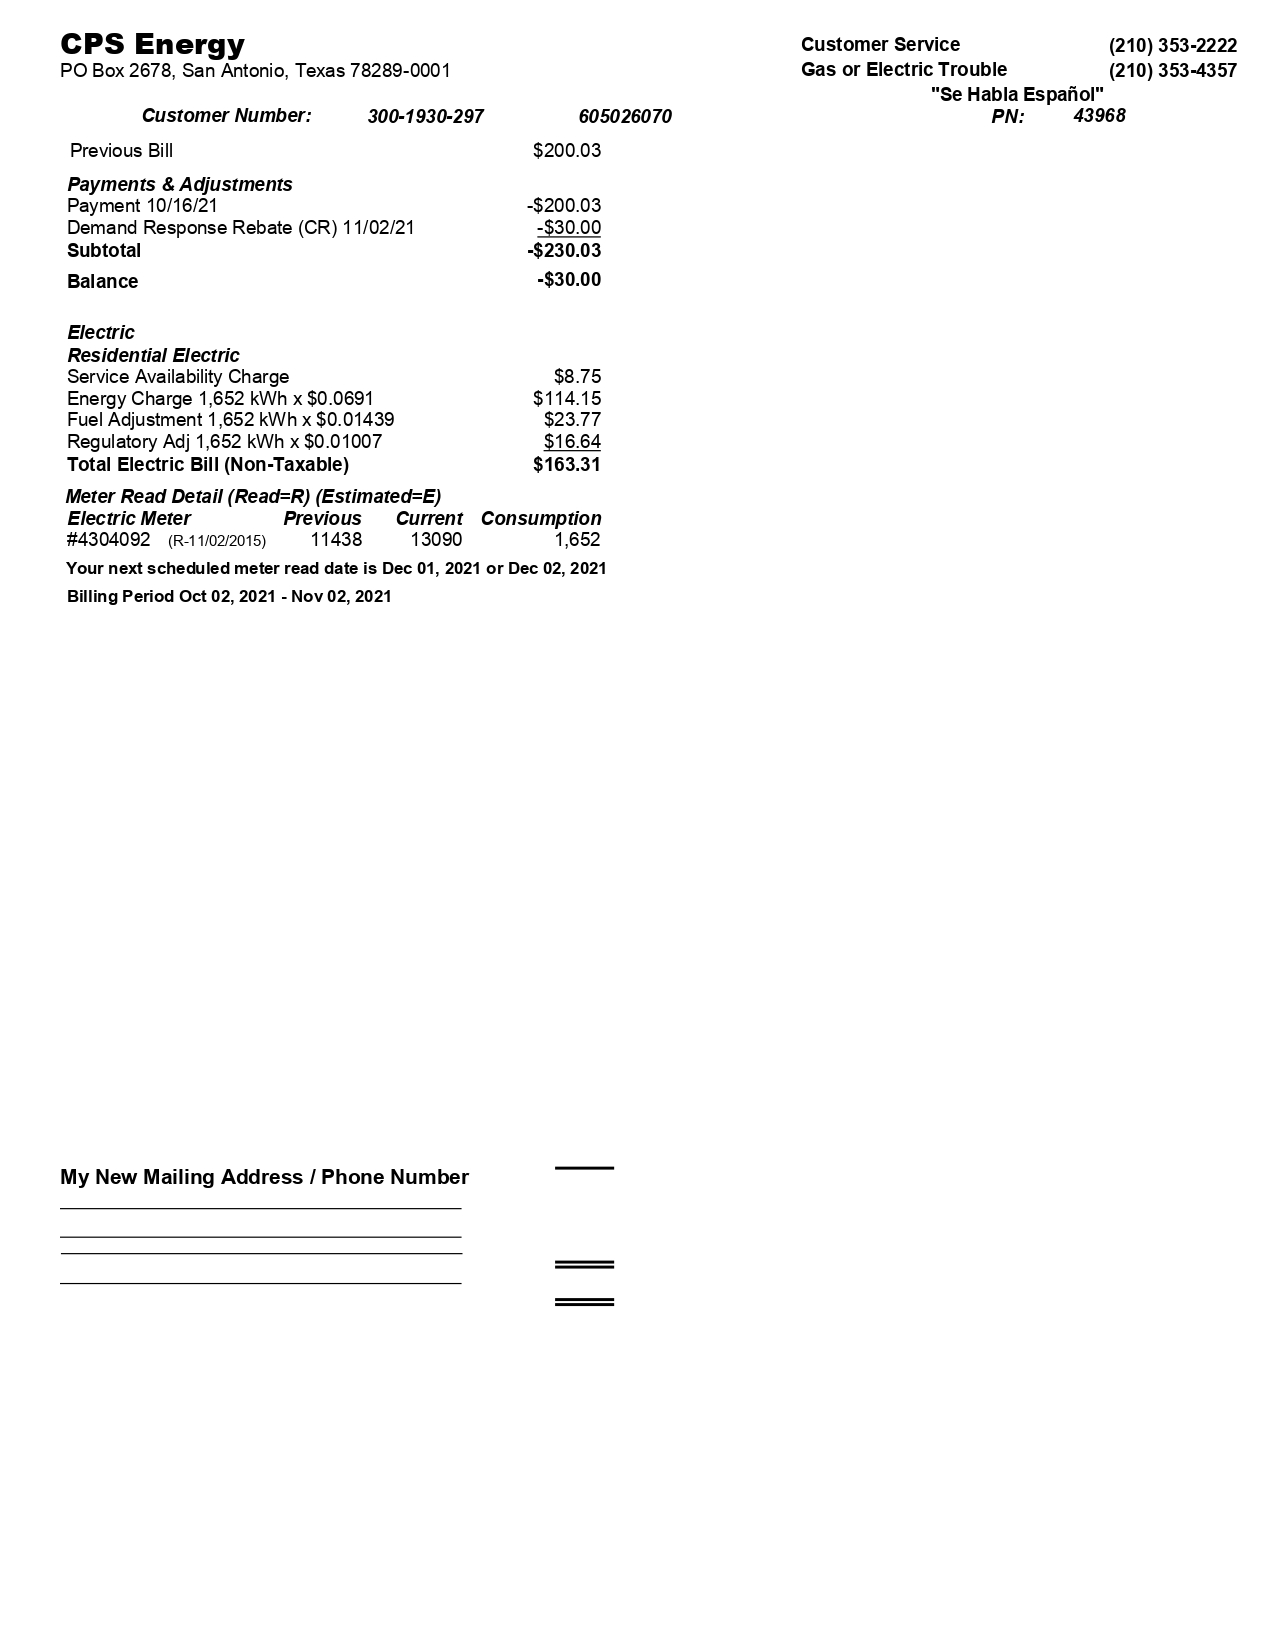 CPS Energy Bill Statement Template